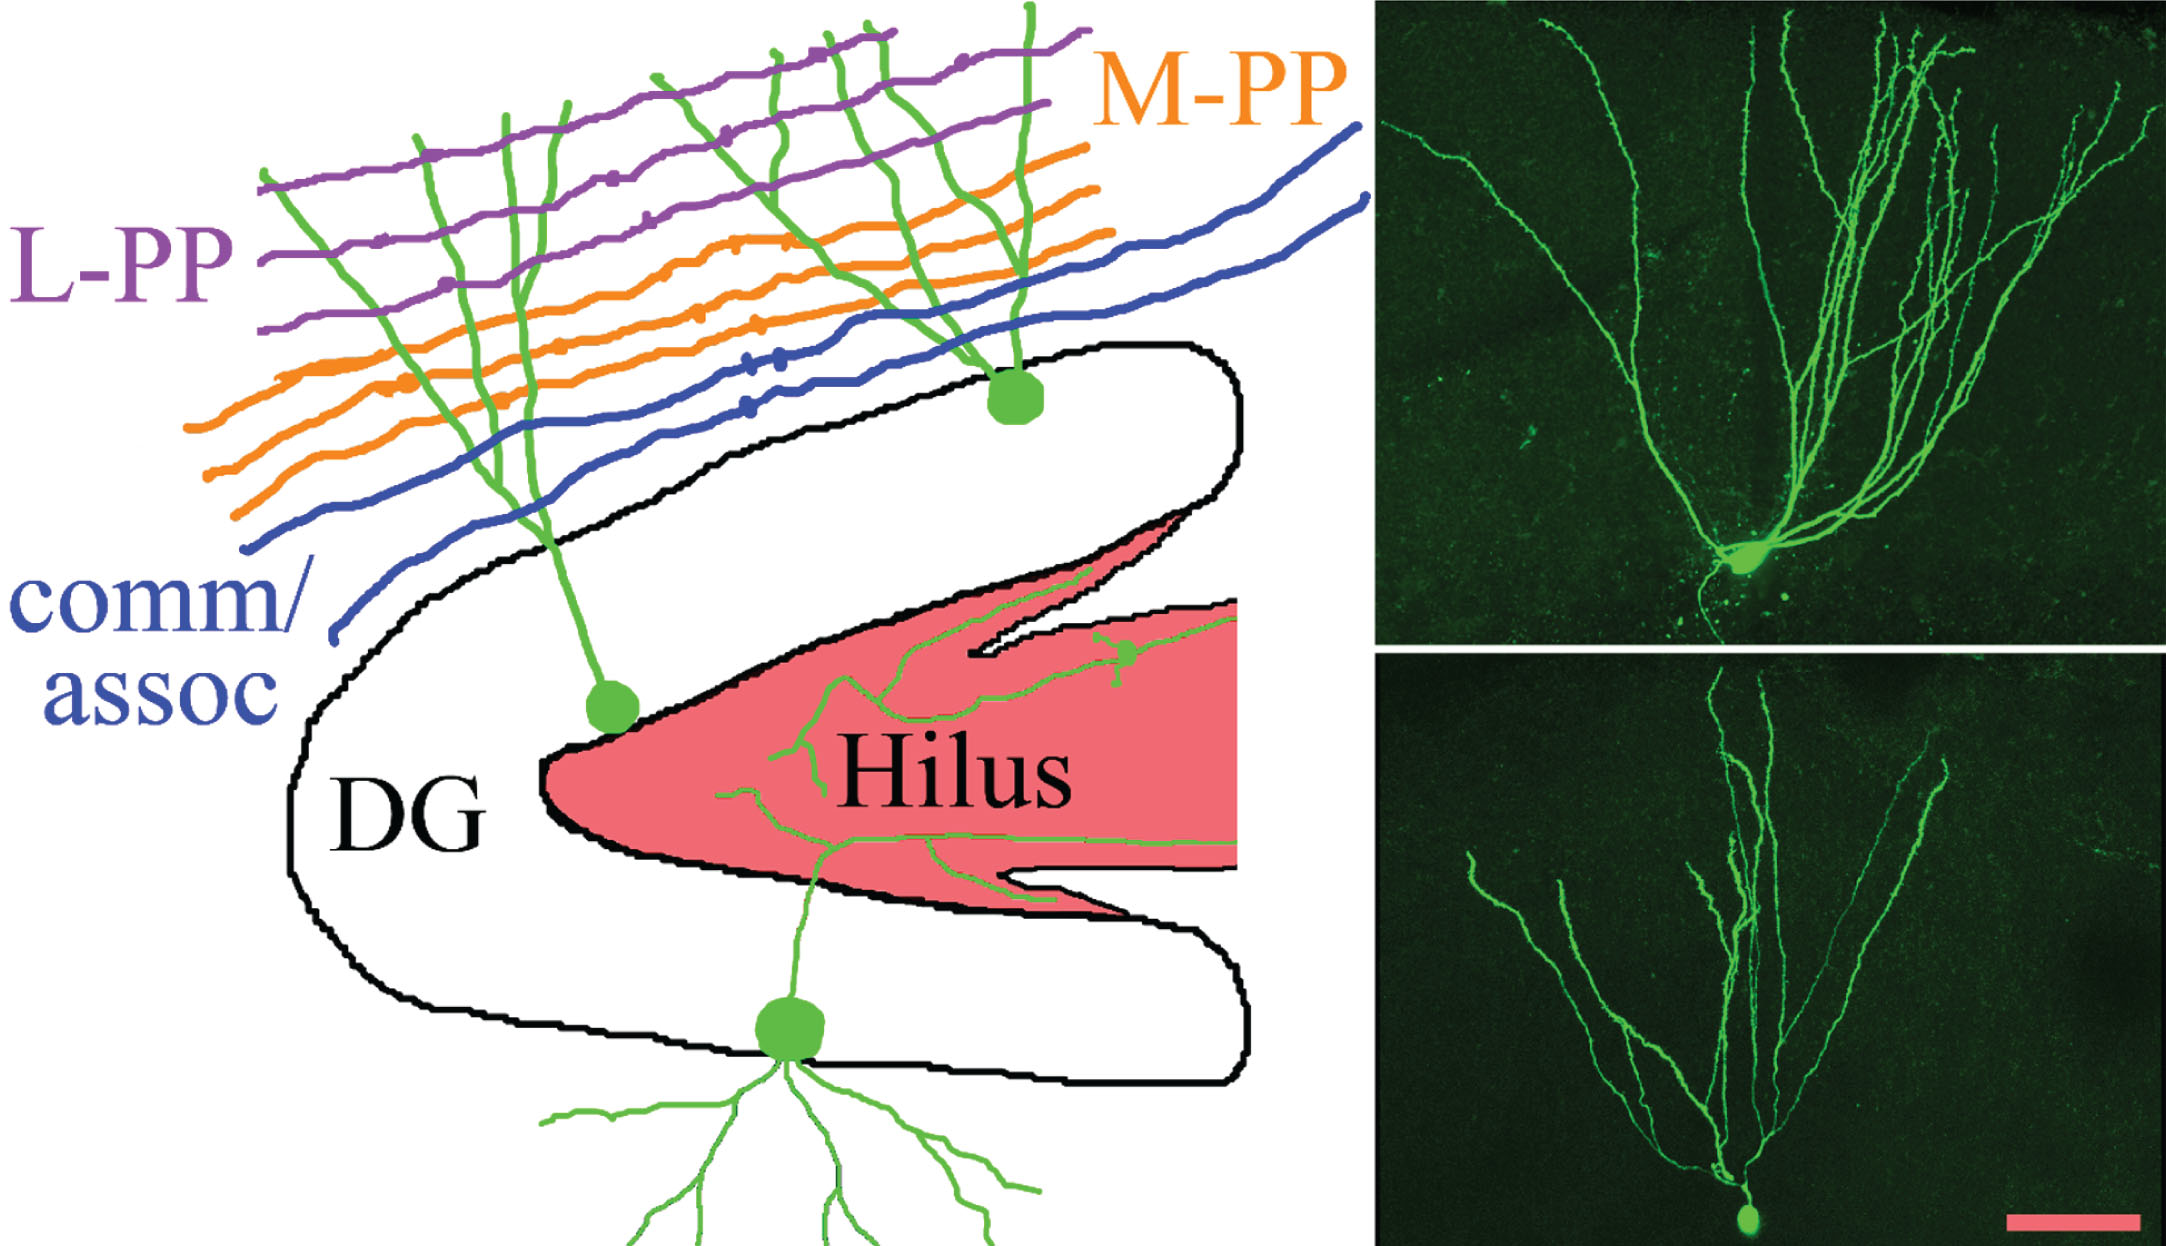 The schematic shows the gross organization of afferent inputs to the molecular layer of the dentate gyrus. Inputs from lateral perforant path (L-PP), medial perforant path (M-PP) and from associational/commissural fibers (comm/assoc) target the outer, middle and inner molecular layer, respectively. Hippocampal granule cells (green) possess cell bodies located in the dentate granule cell body layer (DG) and project dendrites into the molecular layer. Granule cell mossy fiber axons project into the hilus. Micrographs show two biocytin-filled granule cells, revealing the characteristic fanlike spread of the dendritic trees. Scale bar = 50μm.